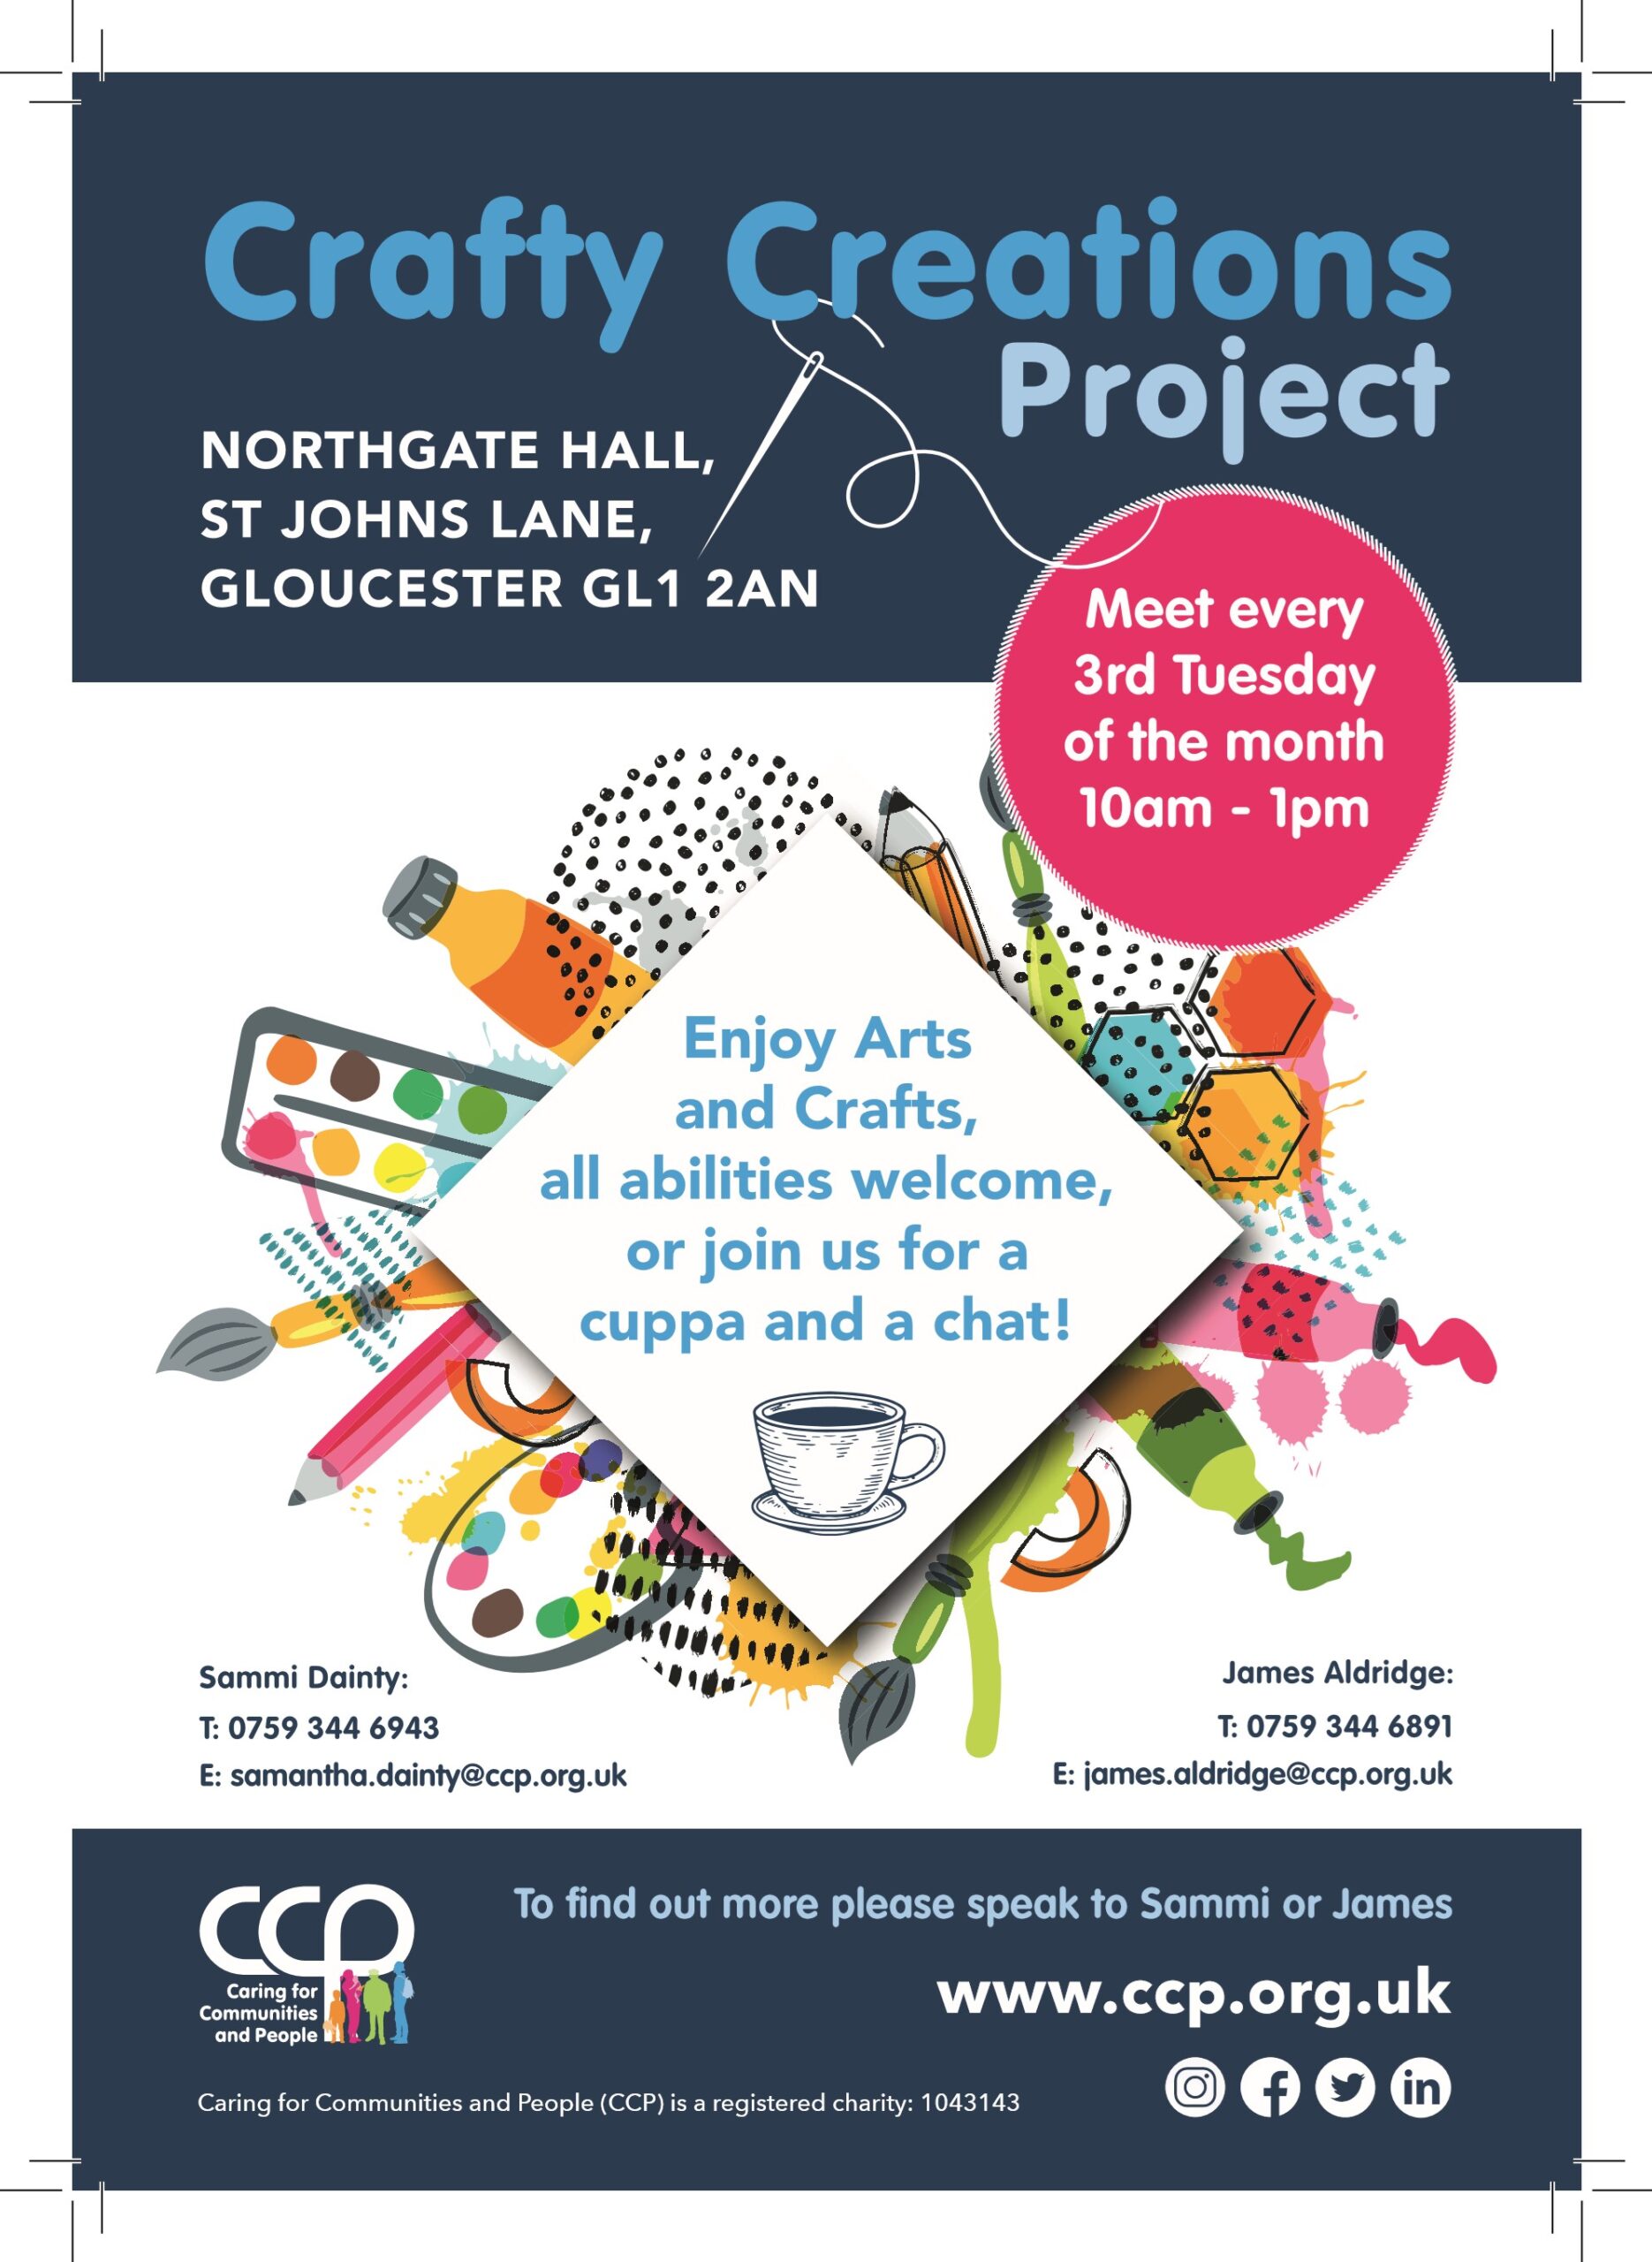 Colourful poster advertising an art and crafts social group. Meet at Northgate Hall, st Johns lane Glos every third Tuesday of the month, 10am - 12noon. Free group and open to anyone over 18 years old. Please contact Sammi Dainty at CCP for more information